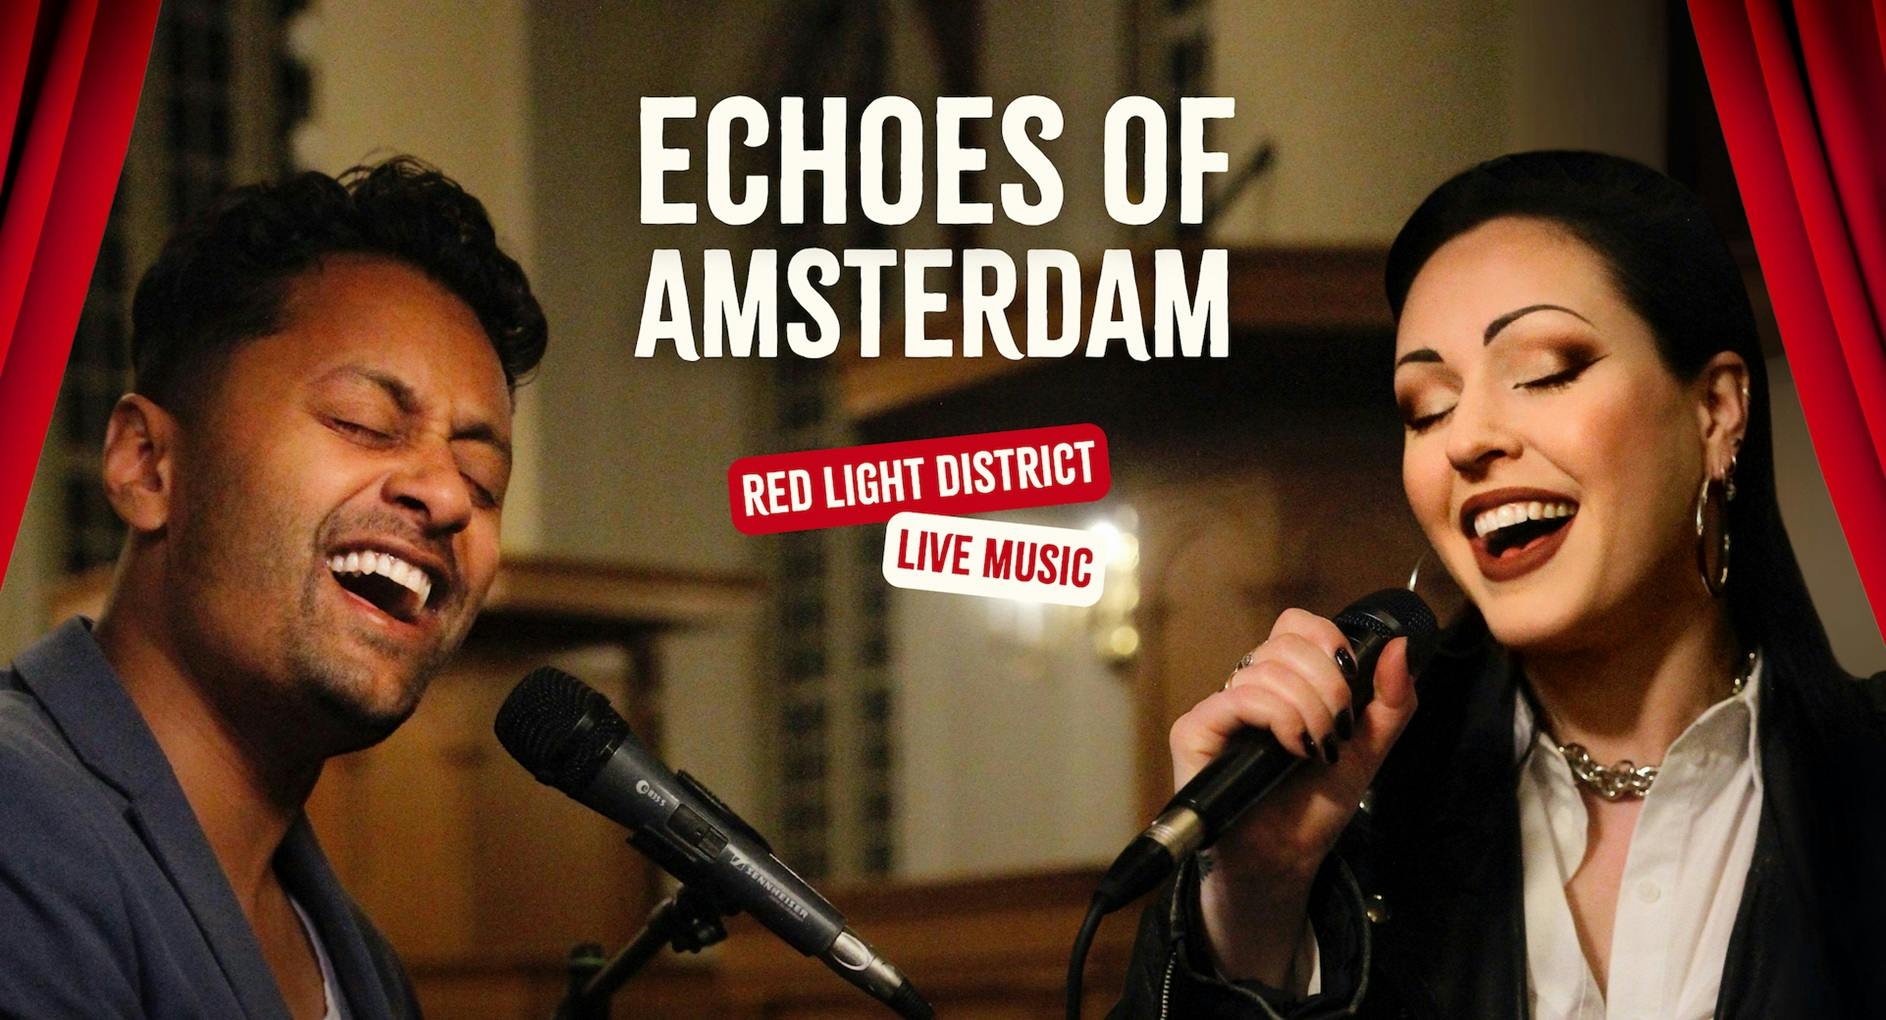 Echoes of Amsterdam